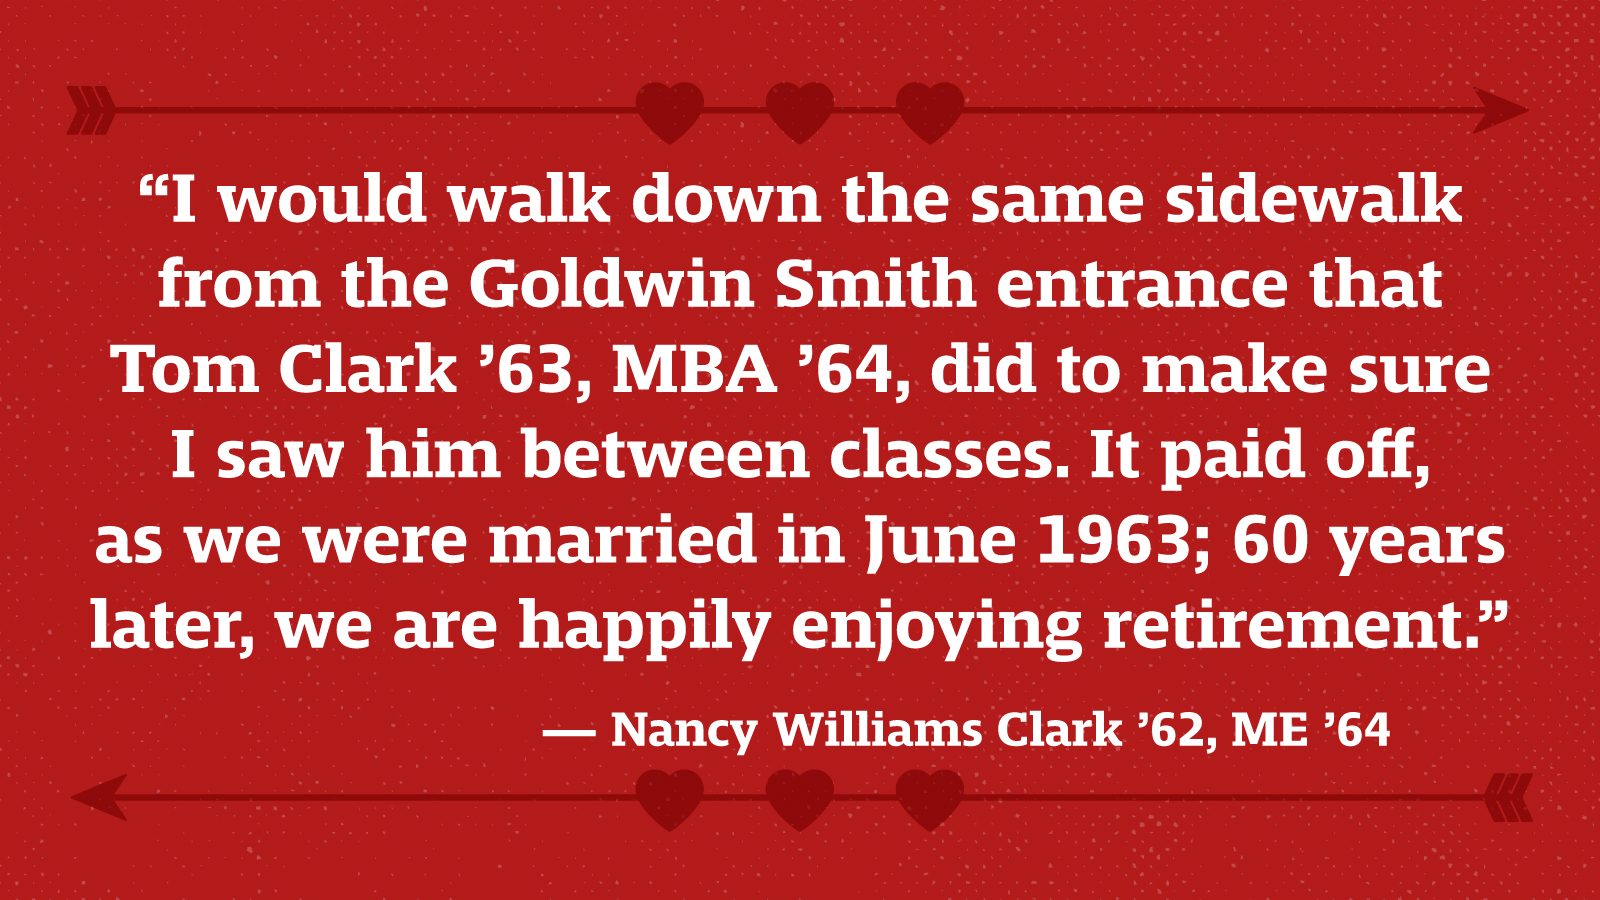 “I would walk down the same sidewalk from the Goldwin Smith entrance that Tom Clark ’63, MBA ’64, did to make sure I saw him between classes. It paid off, as we were married in June 1963; 60 years later, we are happily enjoying retirement.” — Nancy Williams Clark ’62, ME ’64